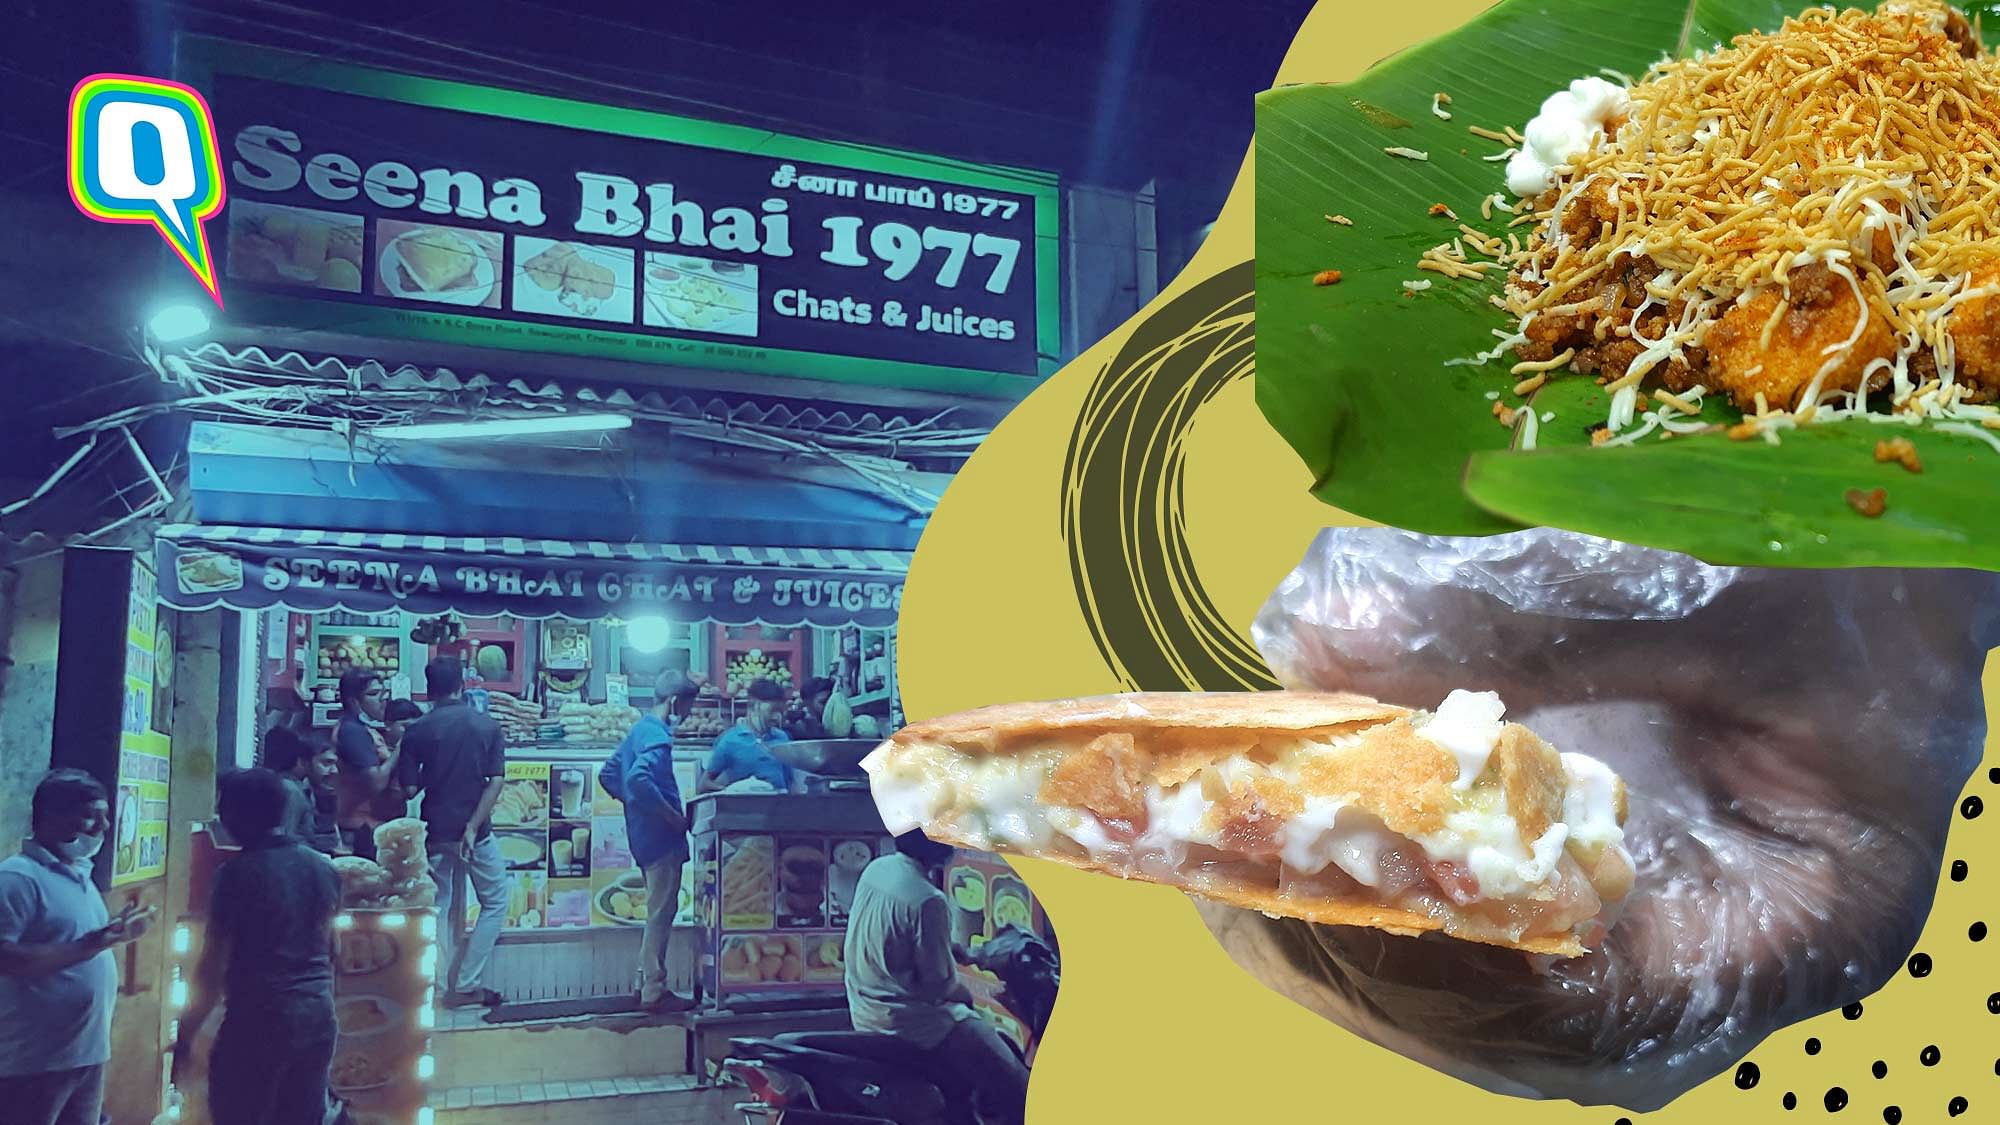 <div class="paragraphs"><p>The restaurant has over seven branches across the city selling over a hundred varieties of dosas, idlies, chaat, and sweets.</p></div>